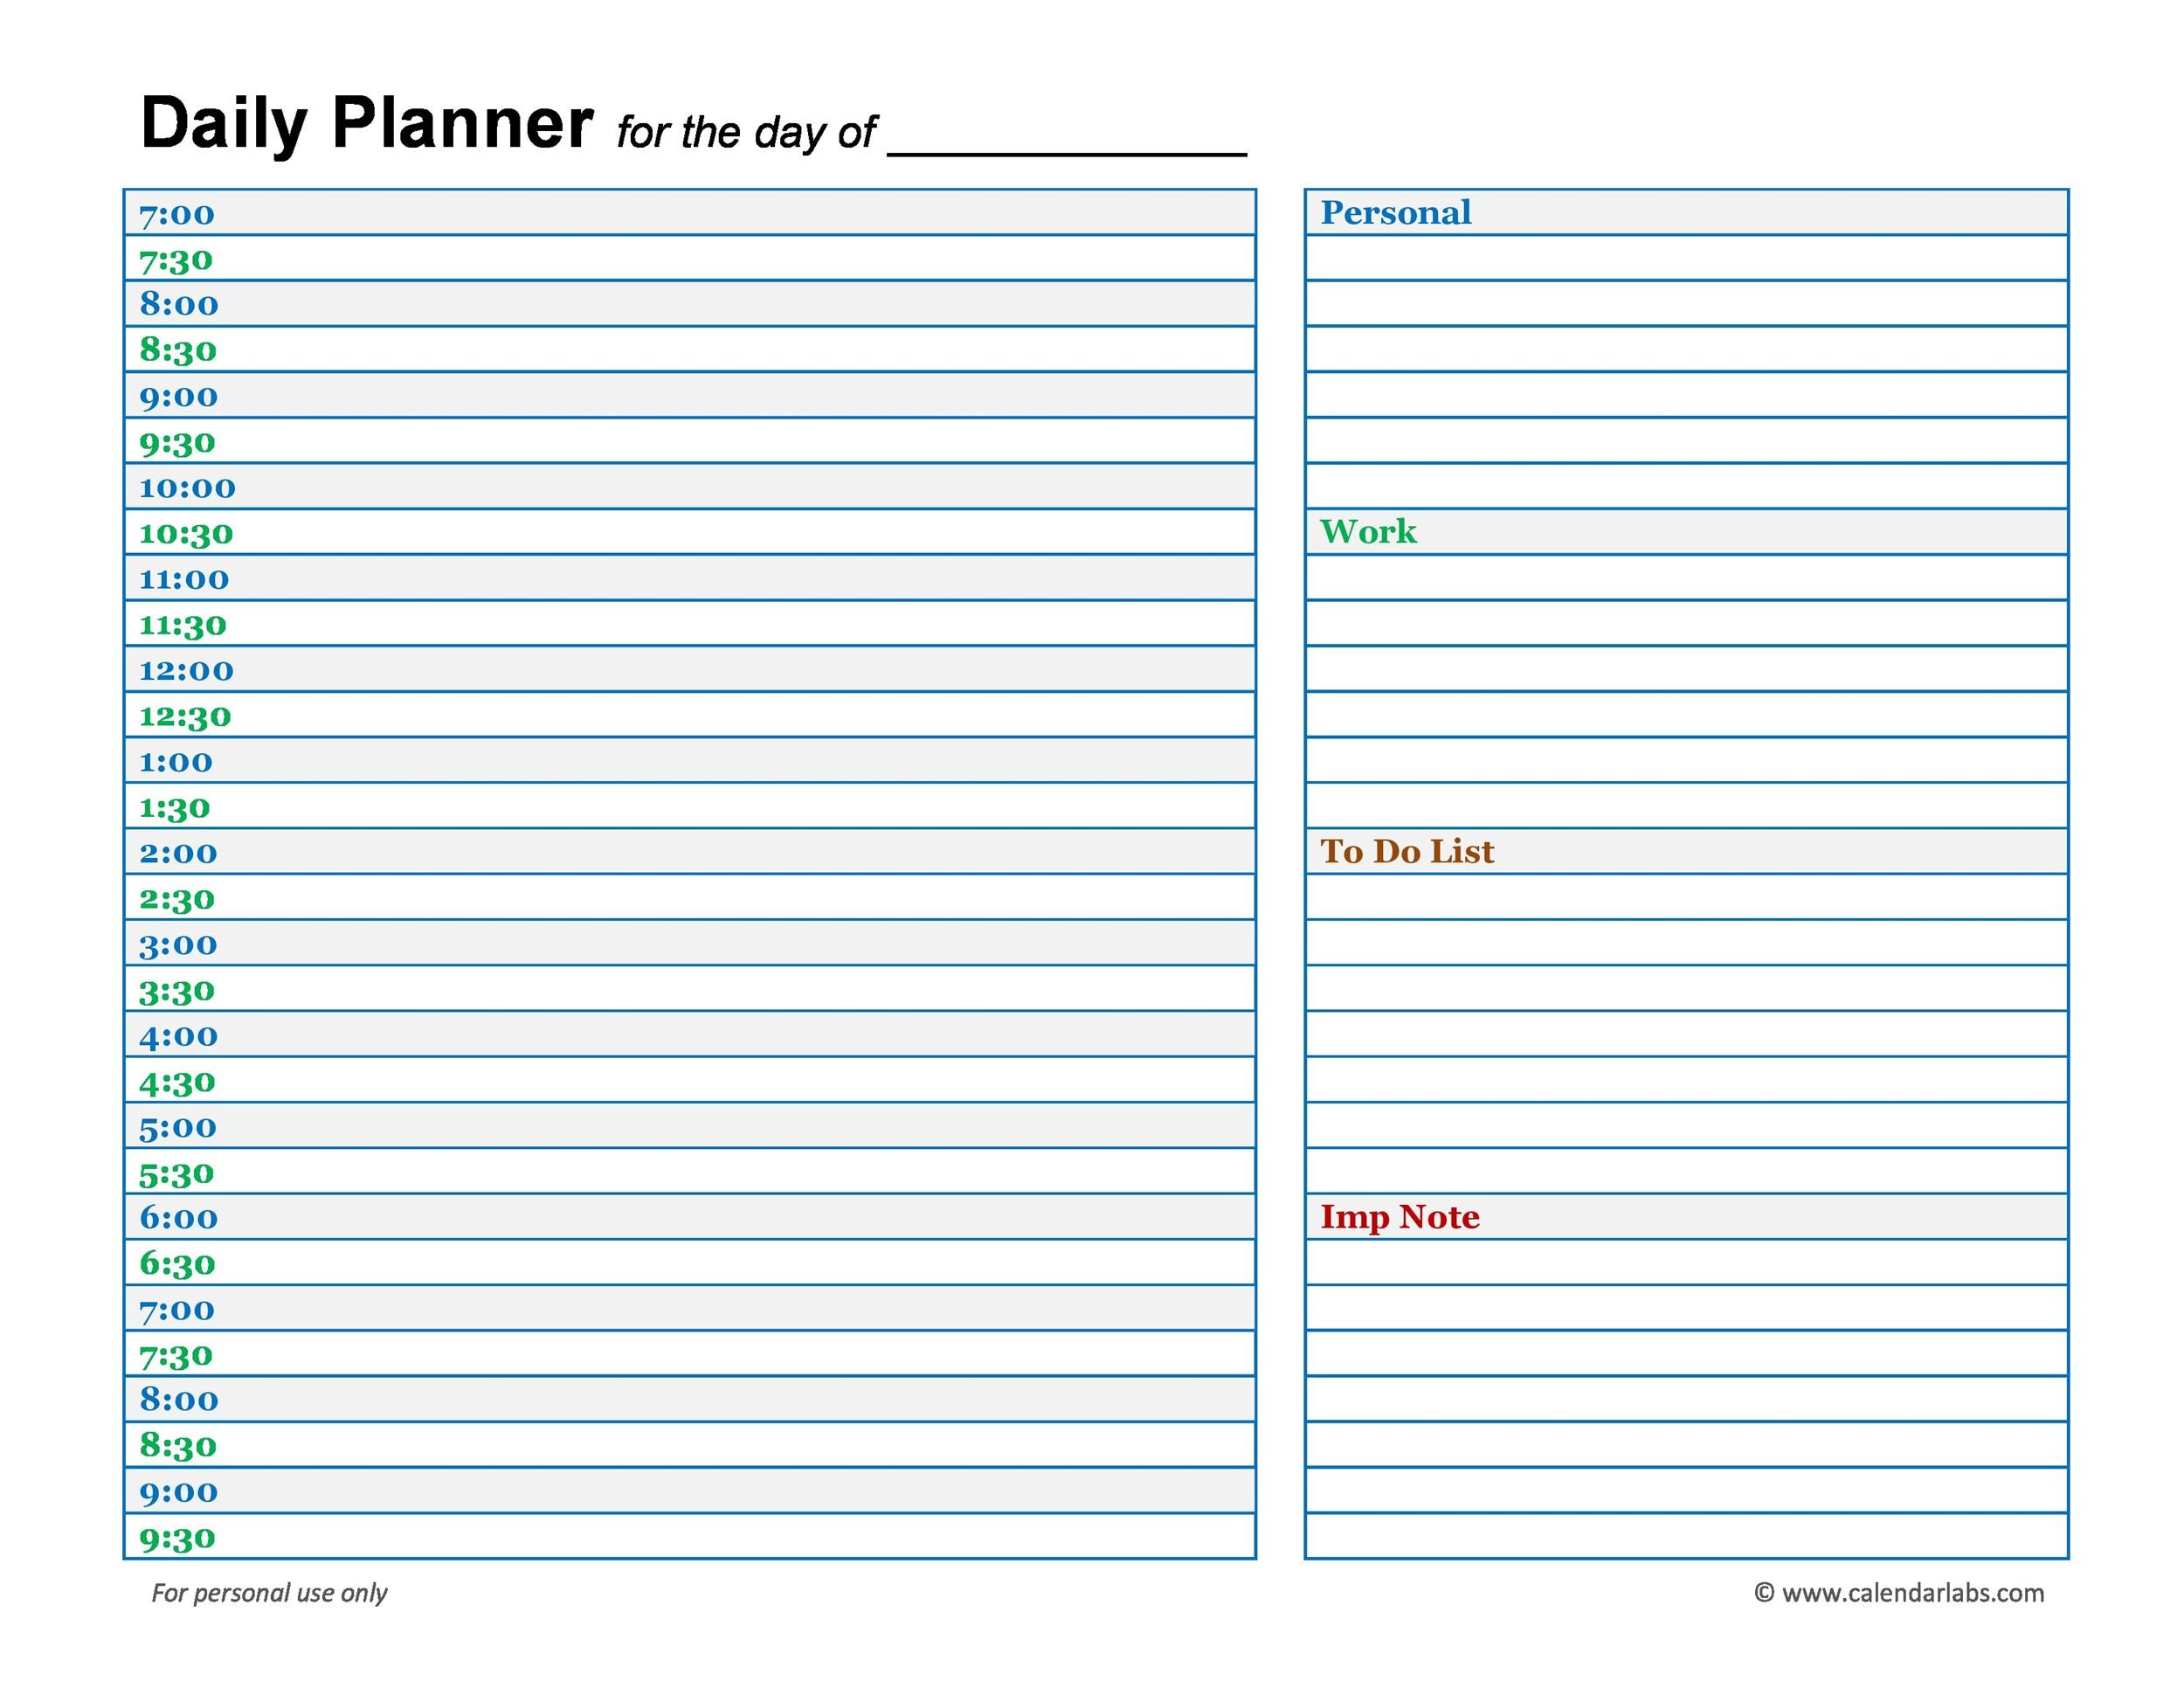 a daily schedule planner